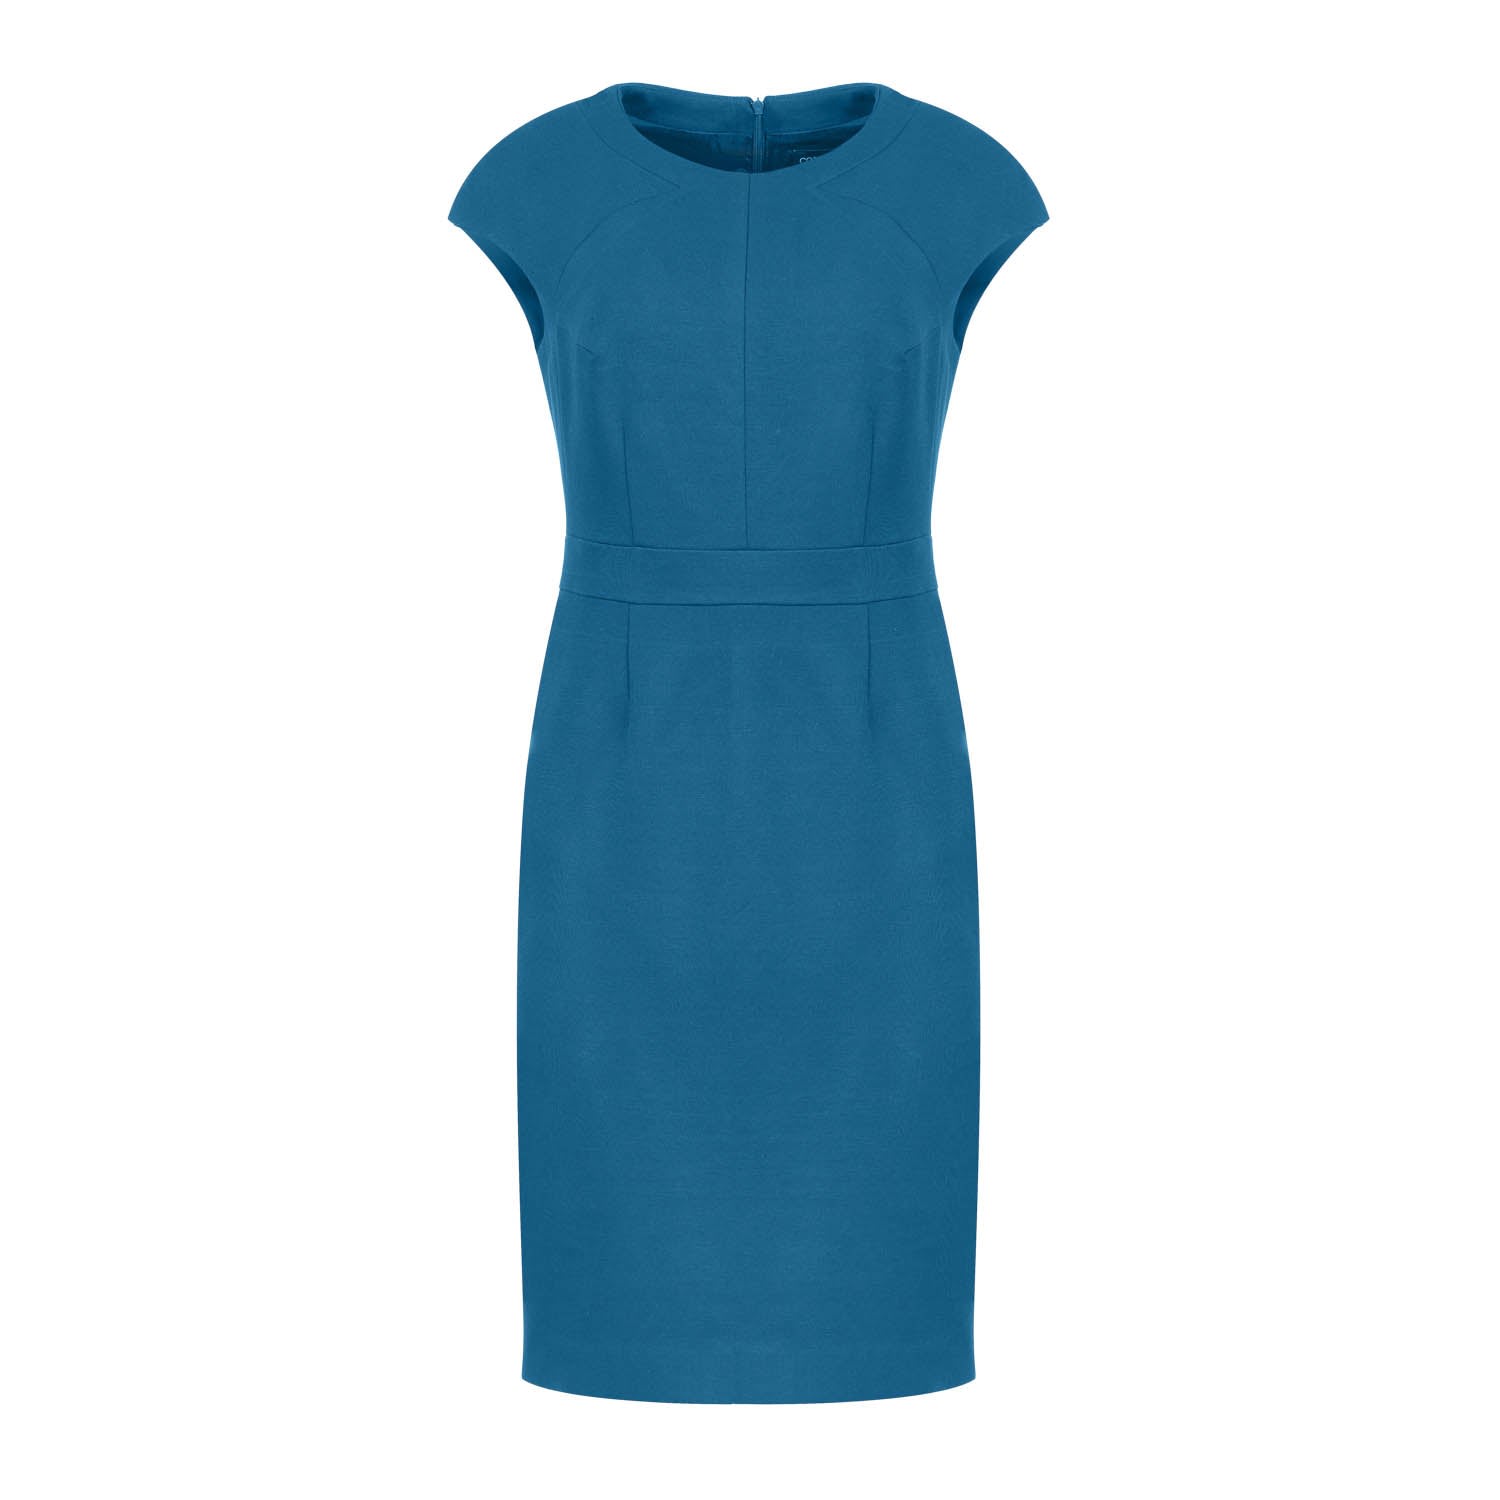 Women’s Fitted Petrol Blue Dress With Cap Sleeves By Conquista. S